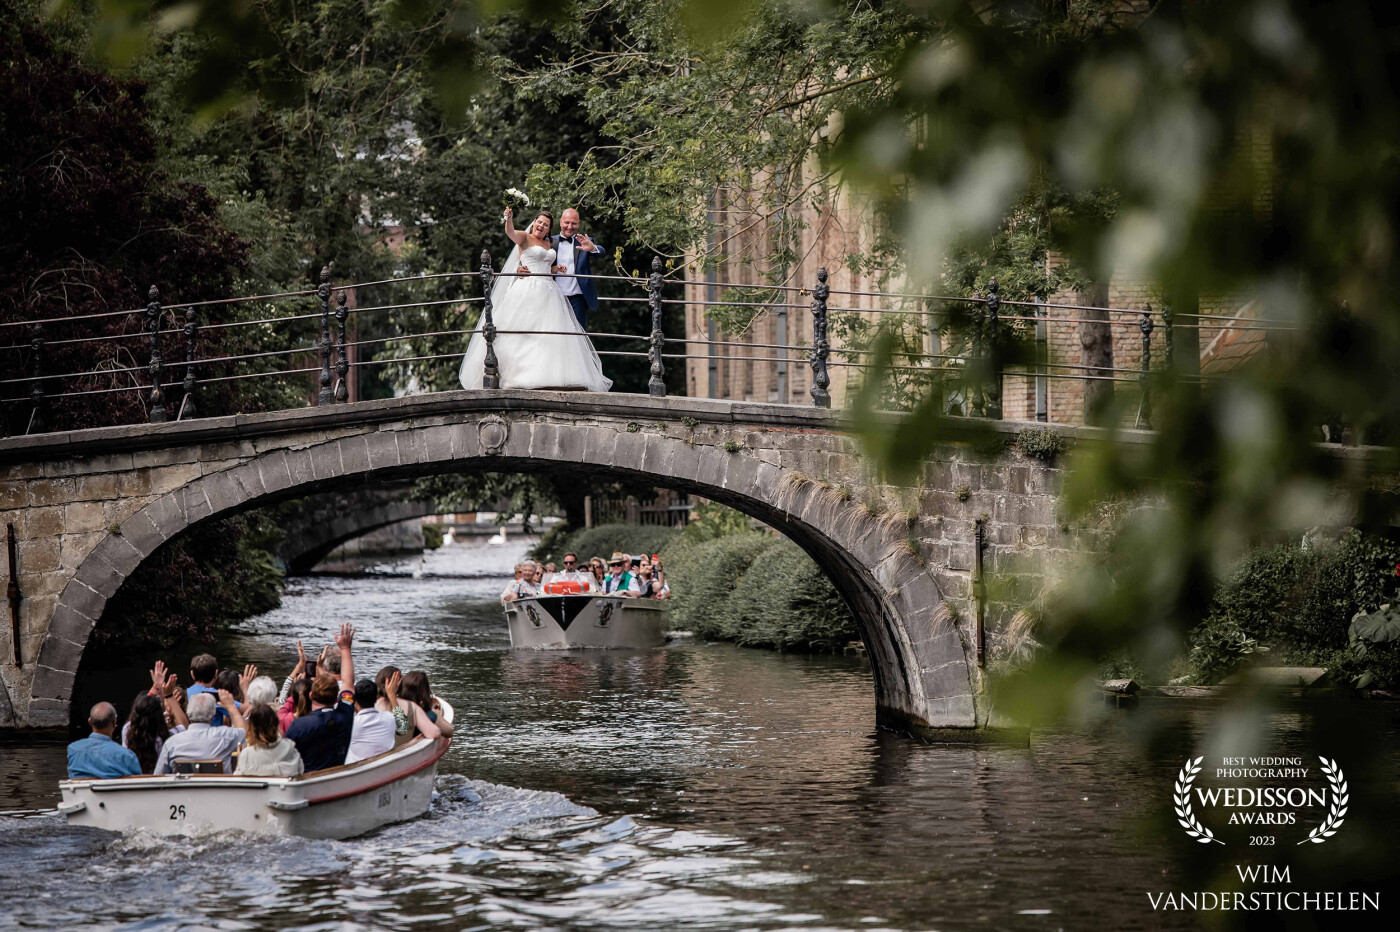 The newlyweds were getting ready to pose for me on a bridge in Bruges, when two boats filled with tourists just passed by waving to them. I knew I had to take a picture of that moment.